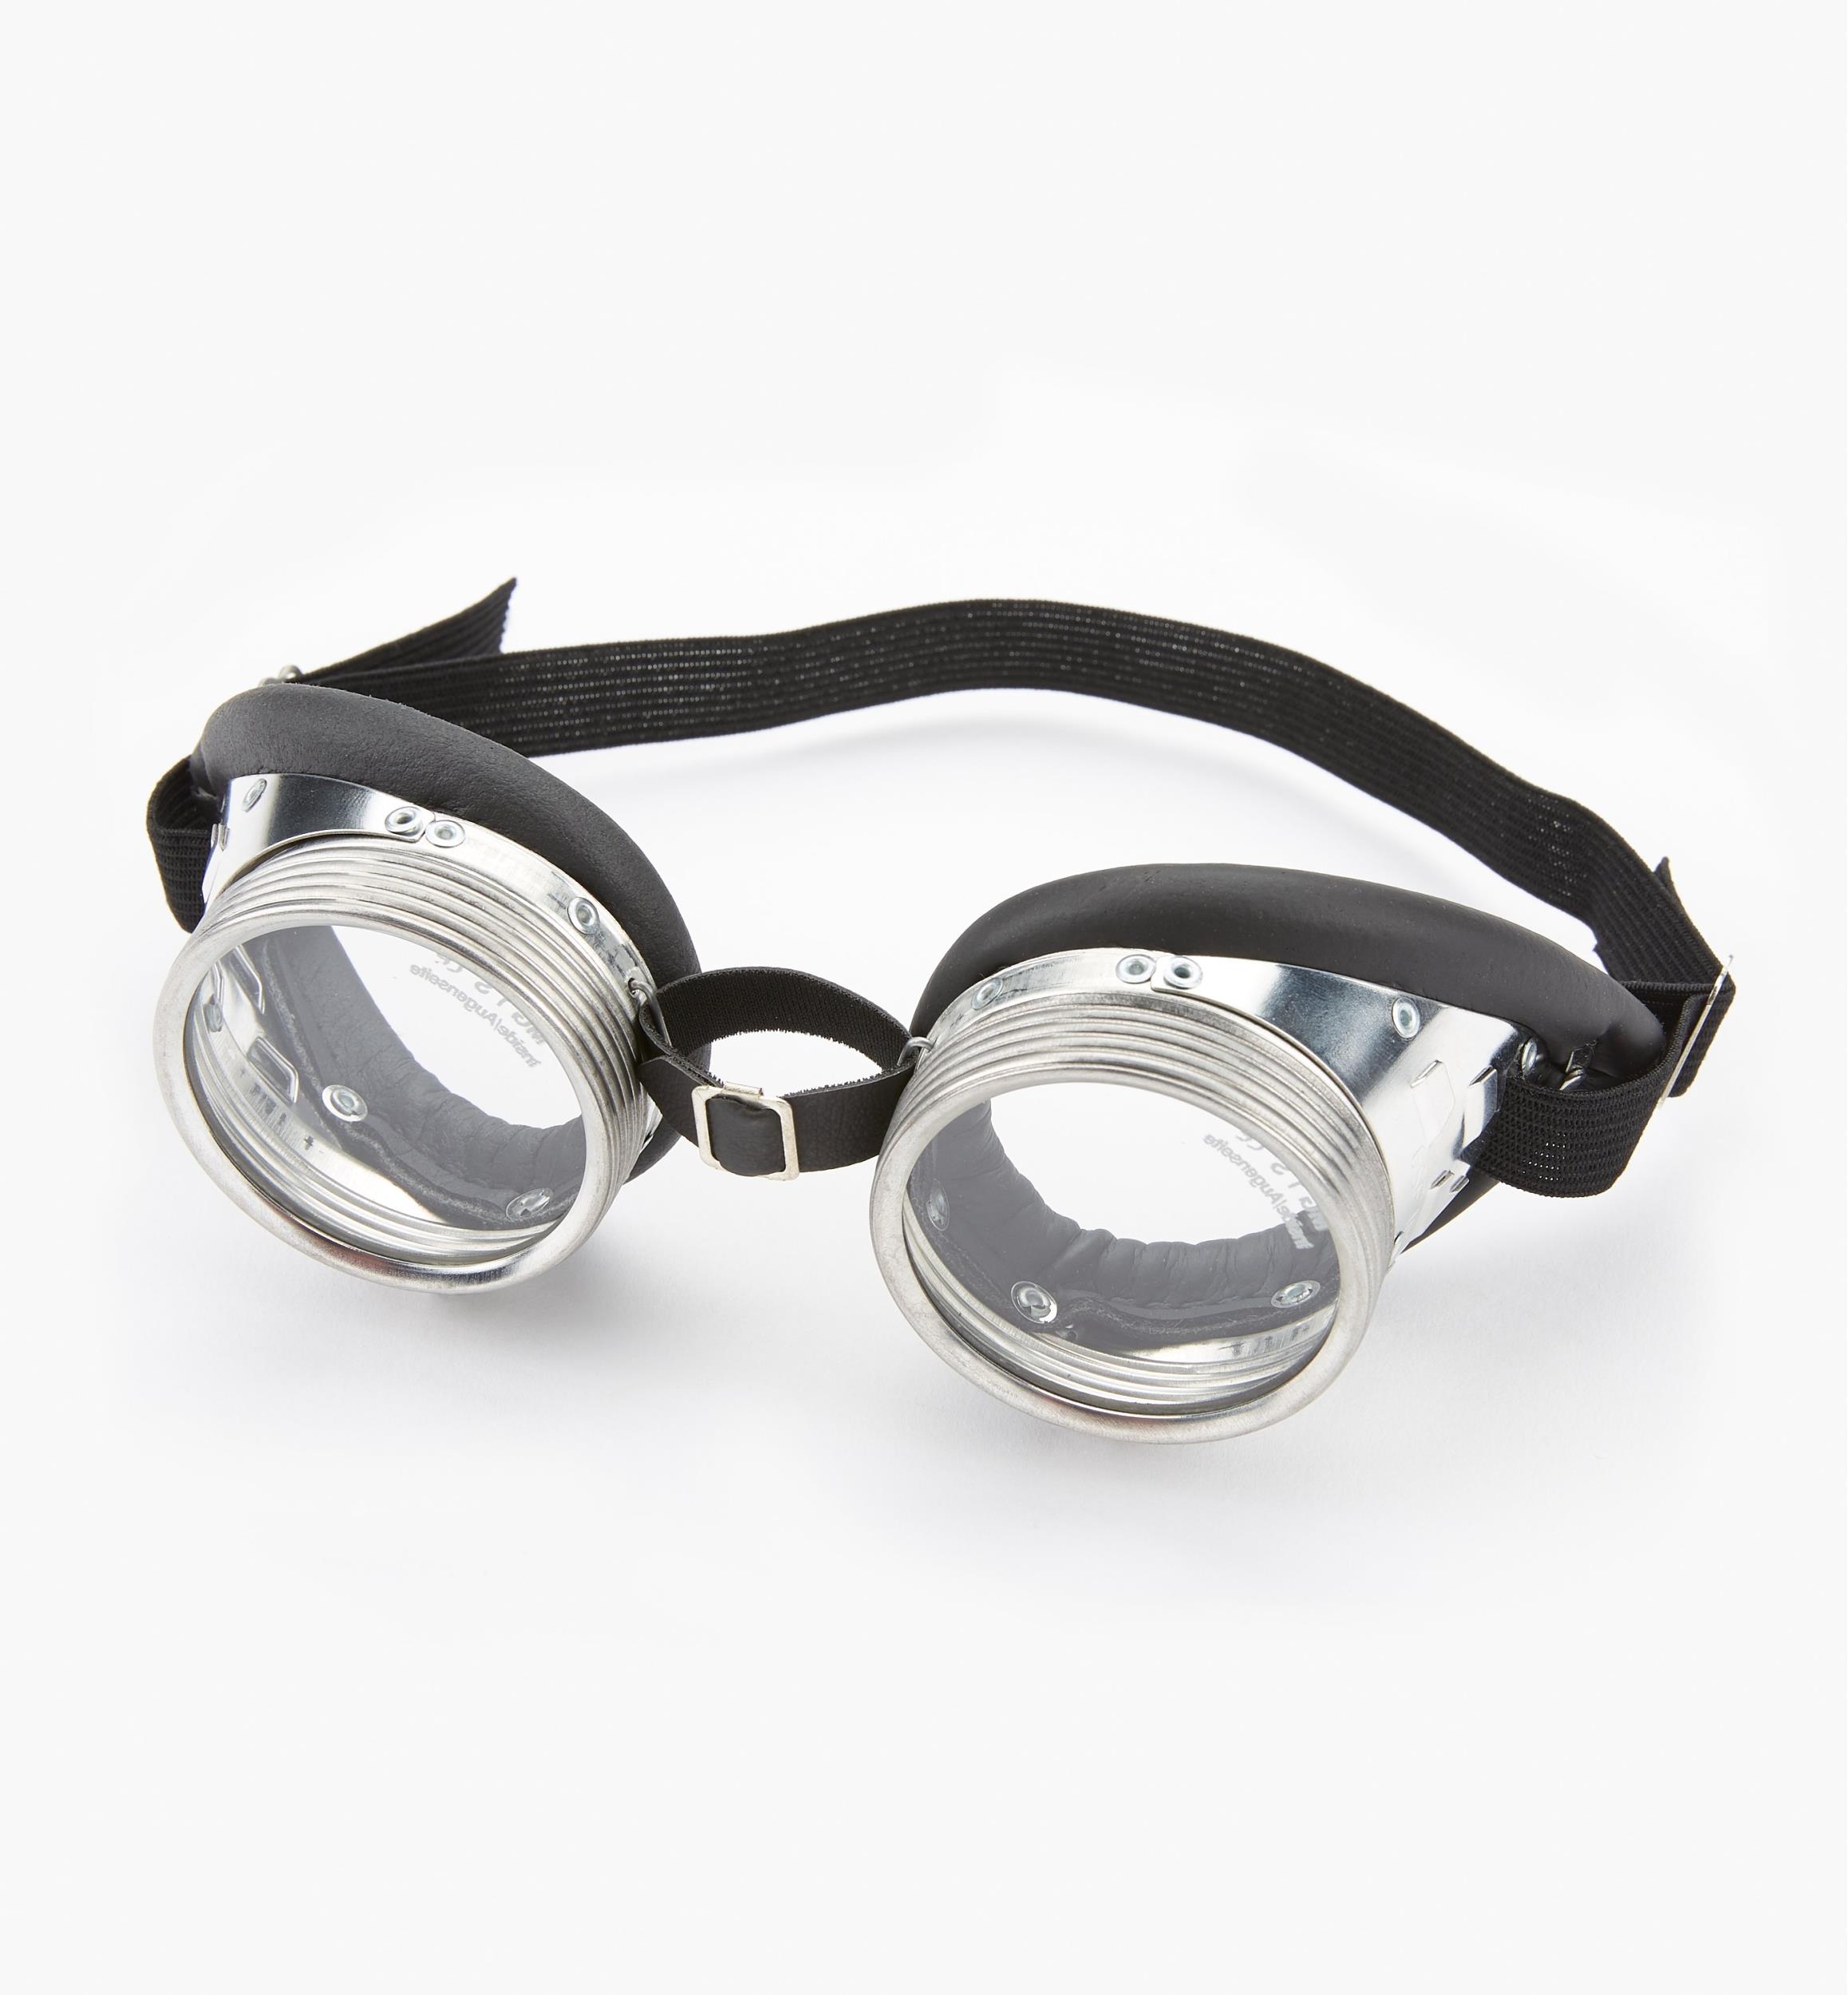 German Safety Goggles Lee Valley Tools